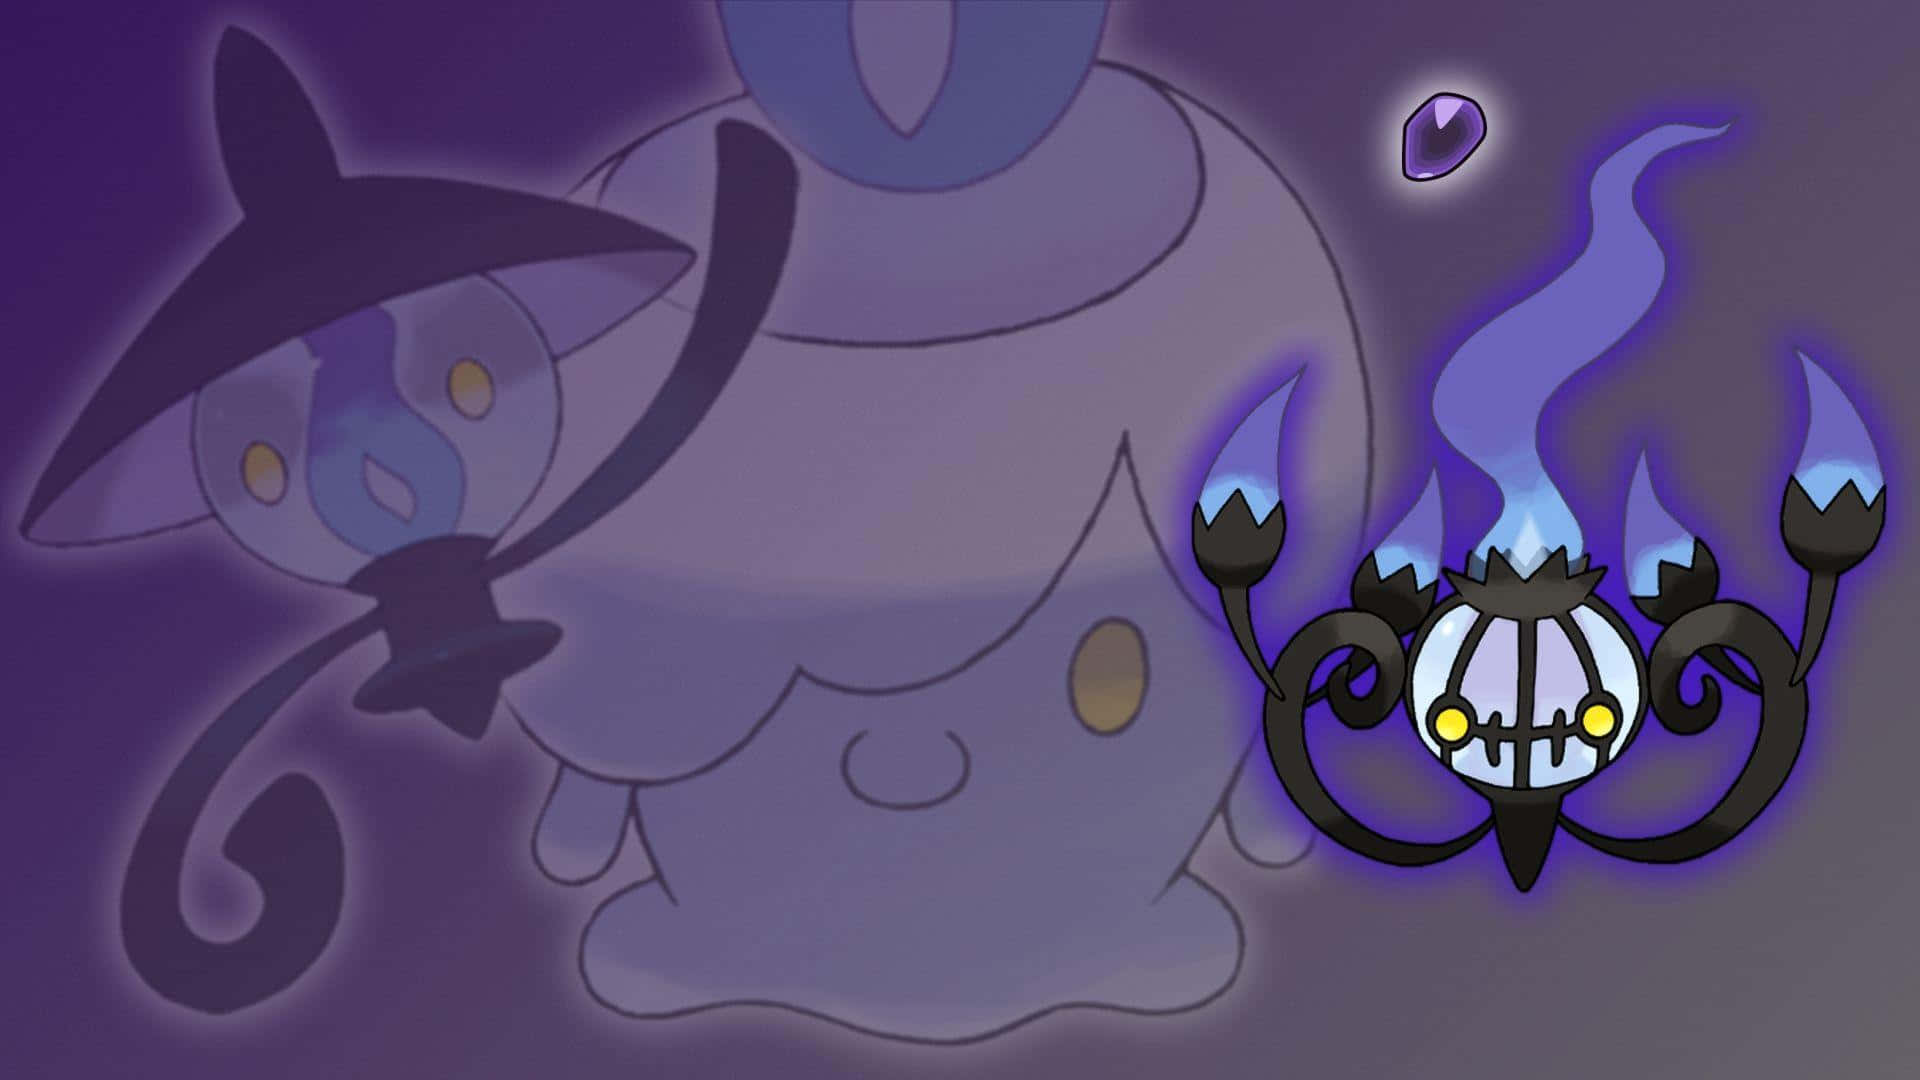 Download Litwick, Lampent And Chandelure Wallpaper | Wallpapers.com